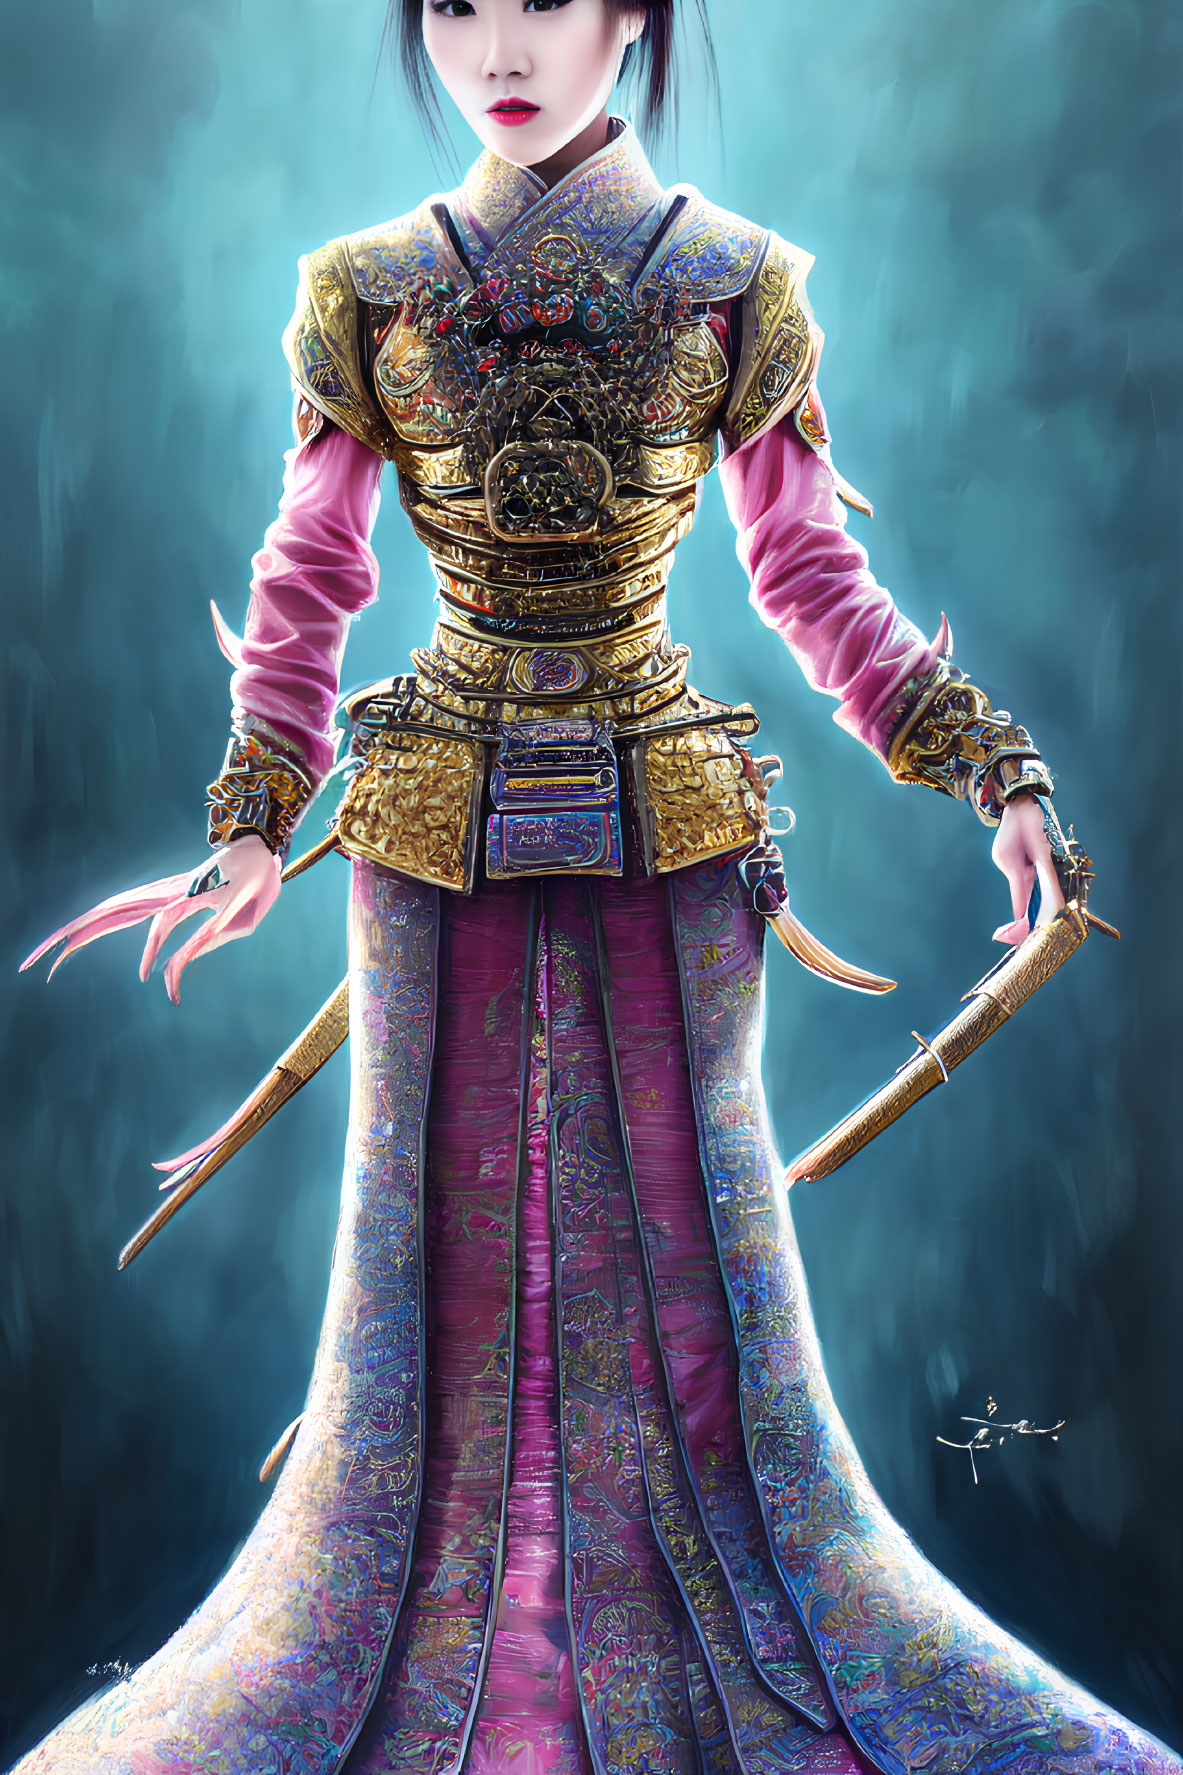 Traditional Asian attire woman in golden armor with sword on teal backdrop